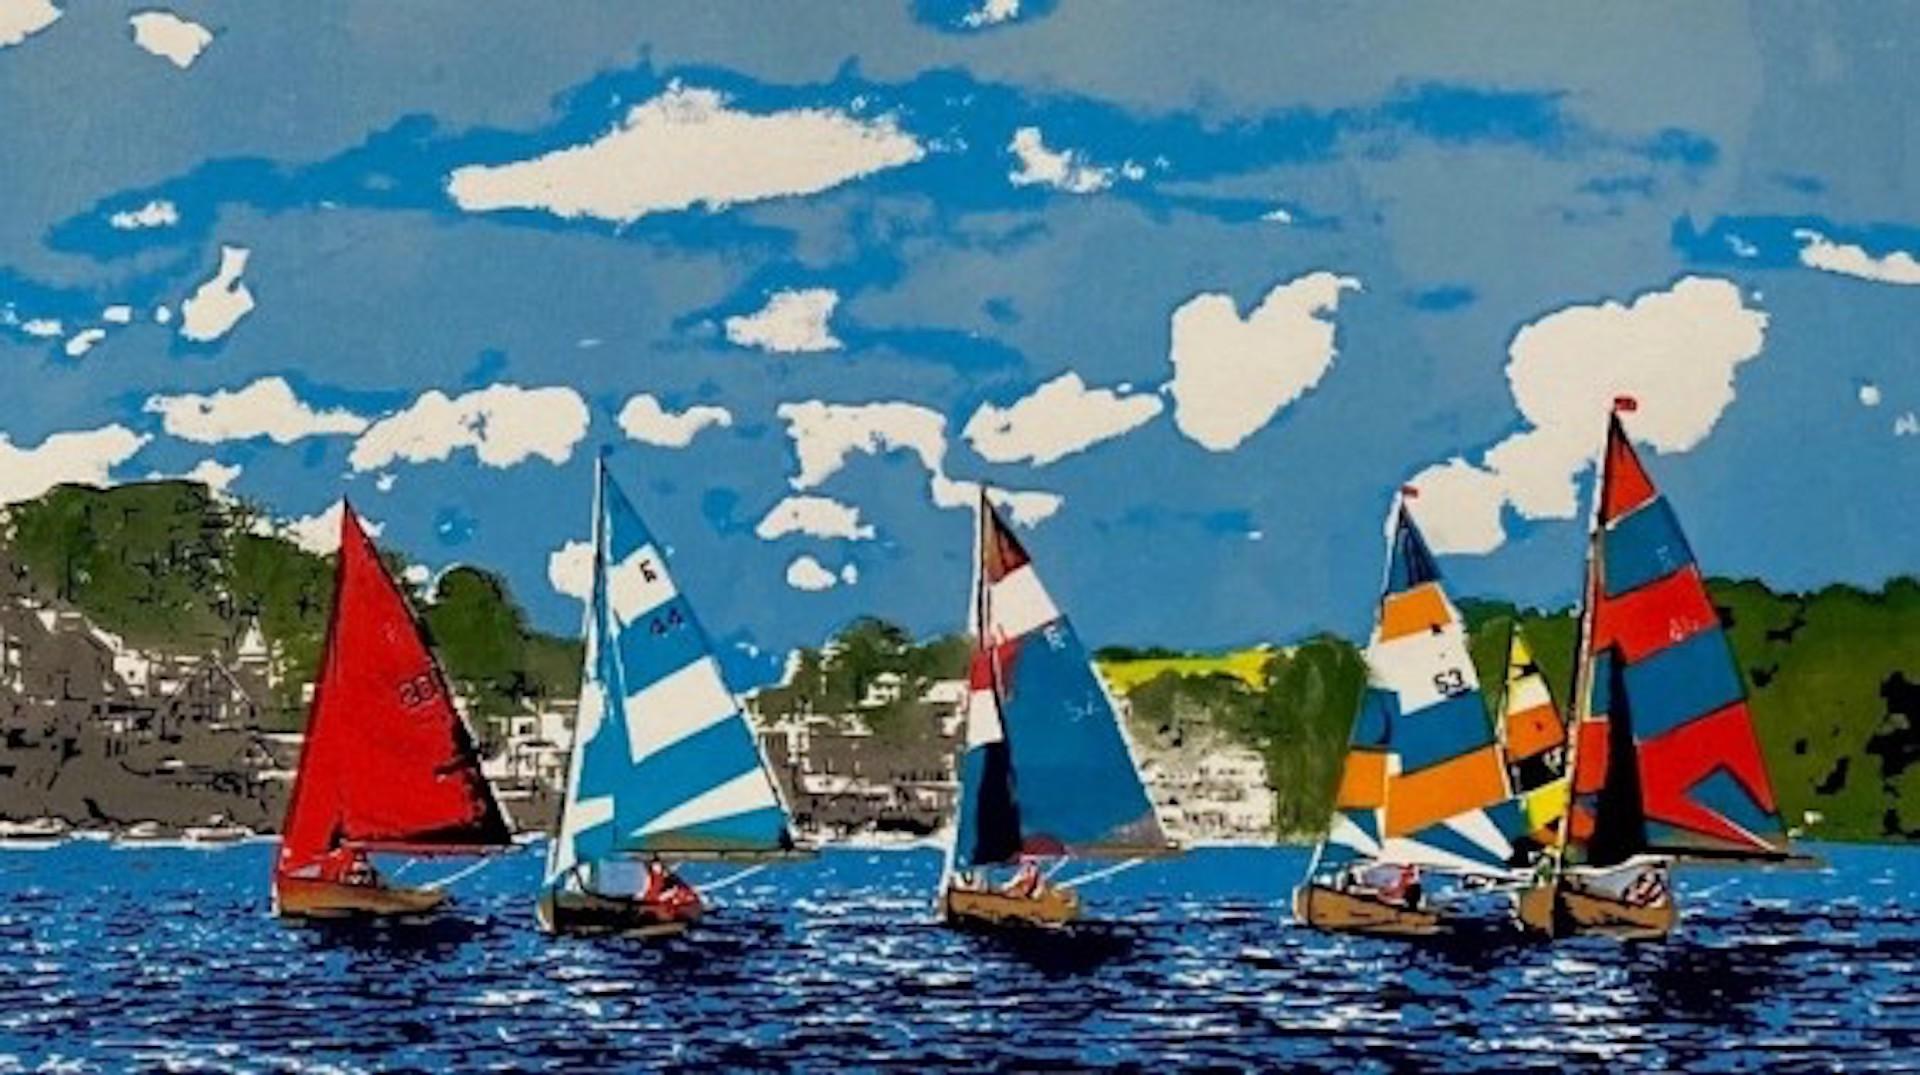 Fowey Sailing [2021]
Limited Edition
Screen Print on Paper
Edition number of 20
Image size: H:25 cm x W:60 cm
Complete Size of Unframed Work: H:70 cm x W:40 cm x D:0.1cm
Sold Unframed
Please note that insitu images are purely an indication of how a